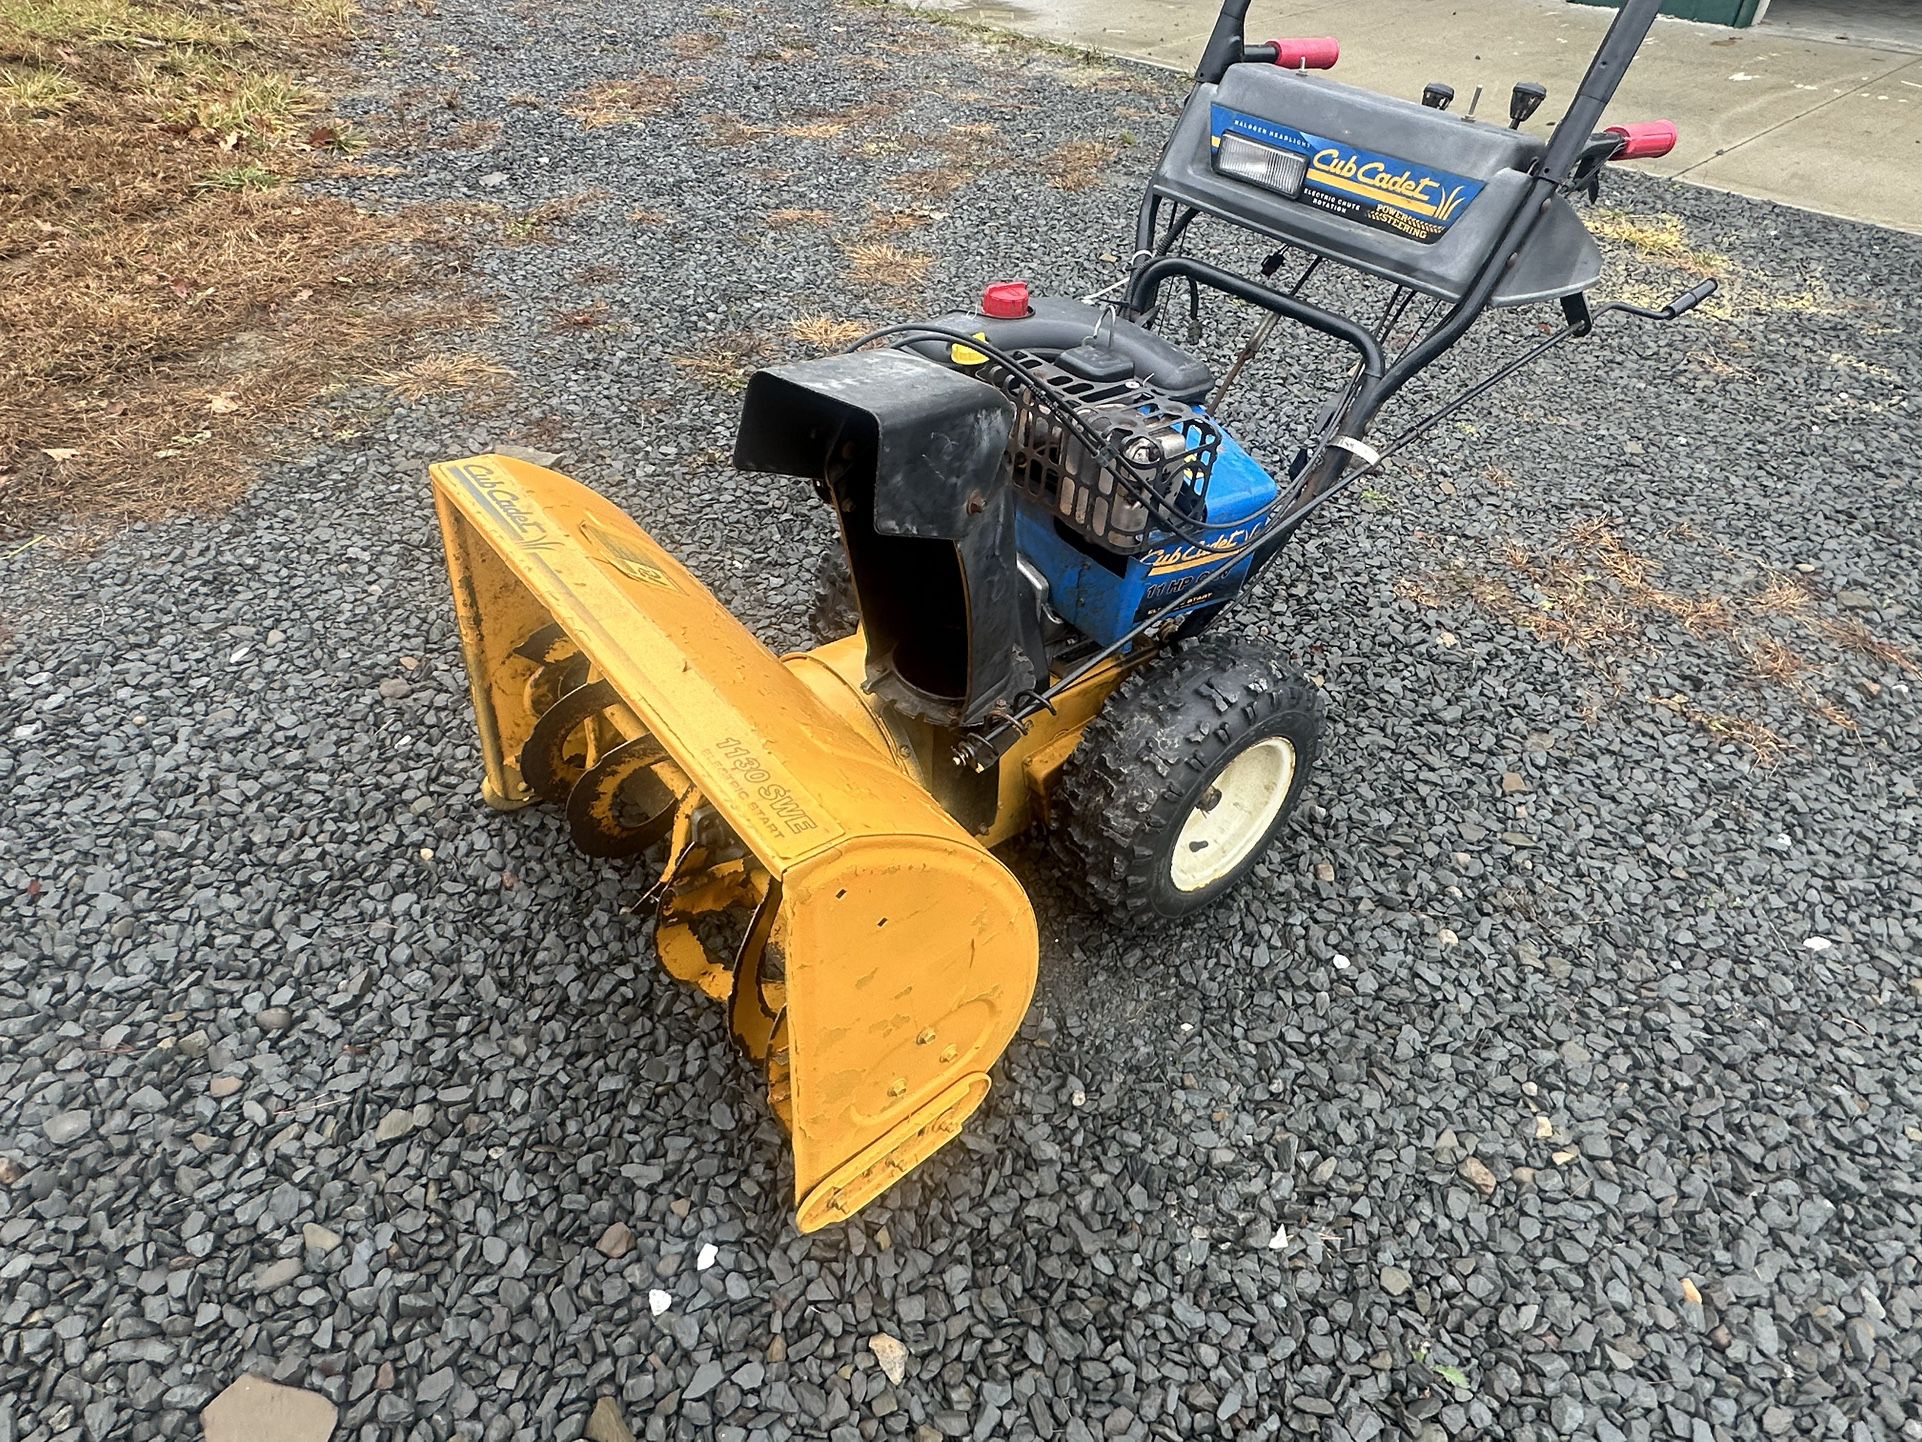 CUB CADET 11HP 30" ELECTRIC START SNOW BLOWER SELF PROPELLED POWER STEERING CHUTE TILT CONTROL ONLY $600